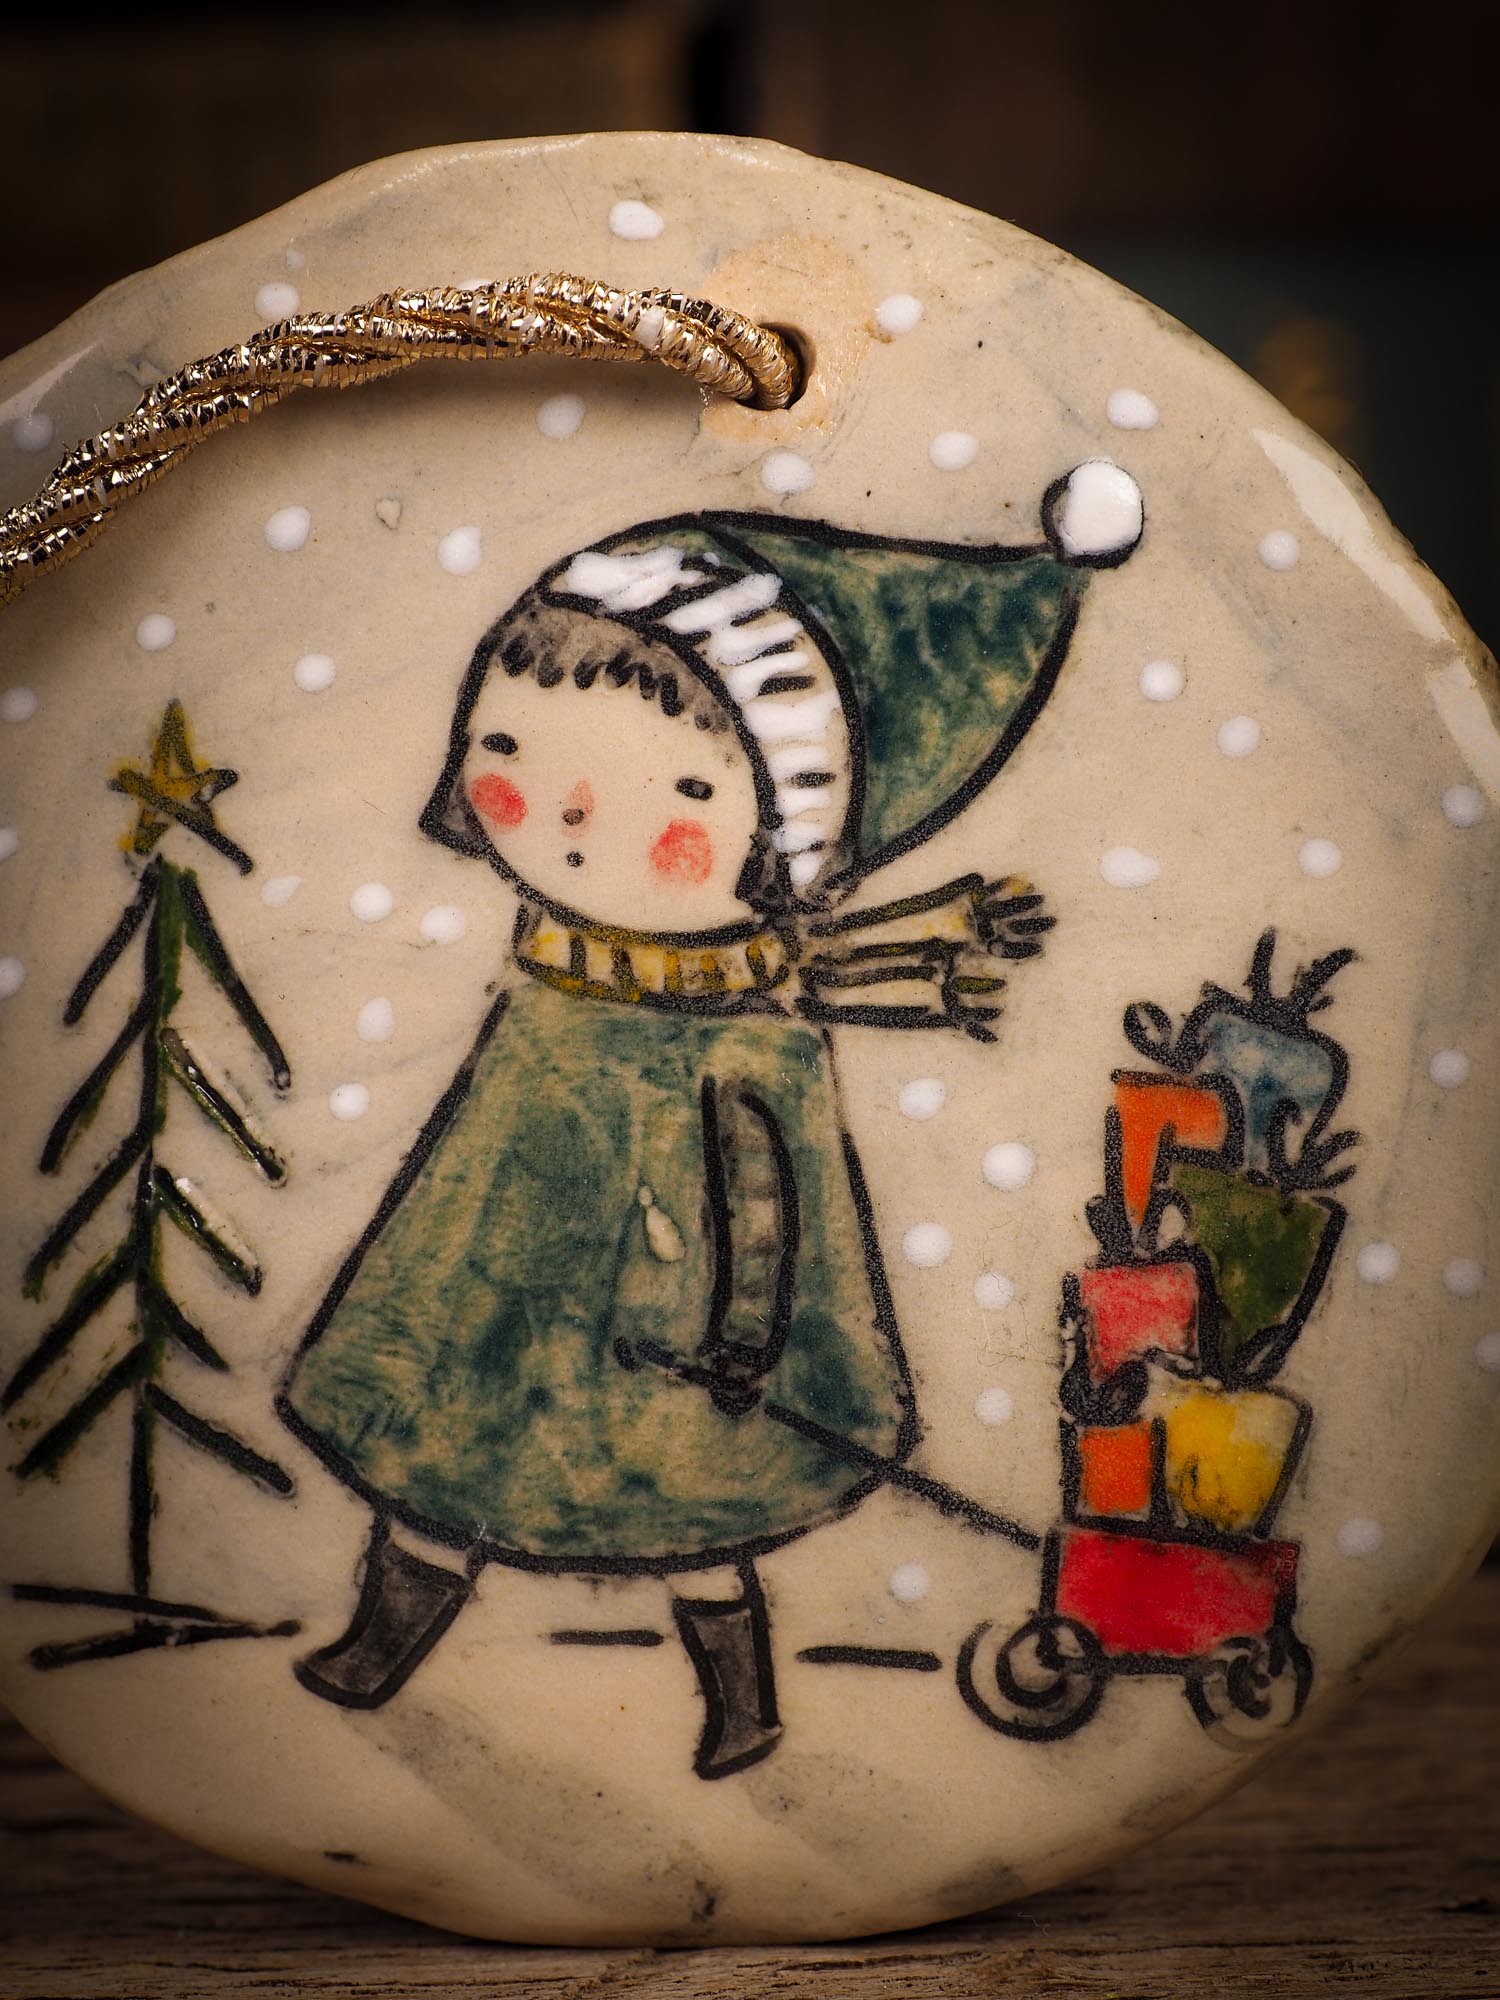 An original Christmas Holiday tree round glazed ceramic ornament handmade by Idania Salcido, the artist behind Danita Art. Glazed carved sgraffito stoneware, hand painted and decorated, it is illustrated by hand with winter scenes with snowmen, Christmas trees, Santa Claus, snow balls and winter themes.